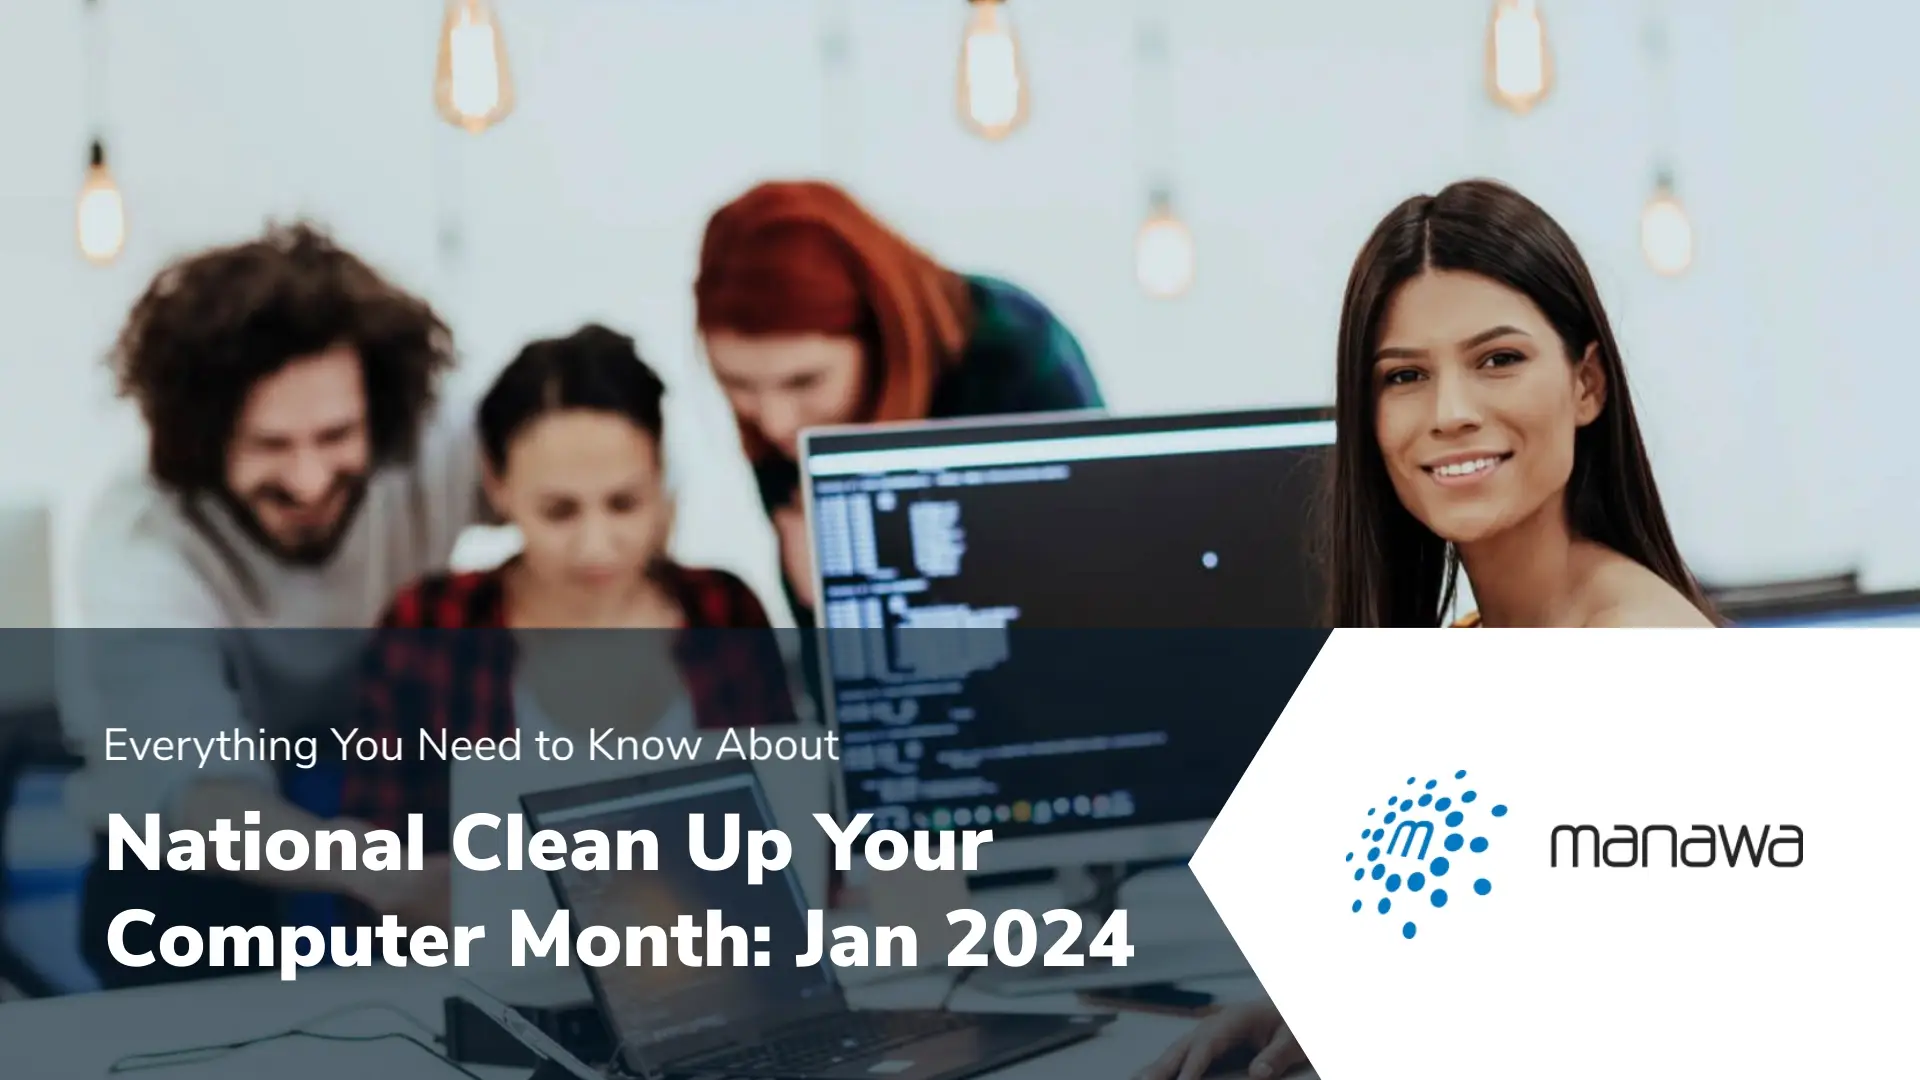 National Clean Up Your Computer Month